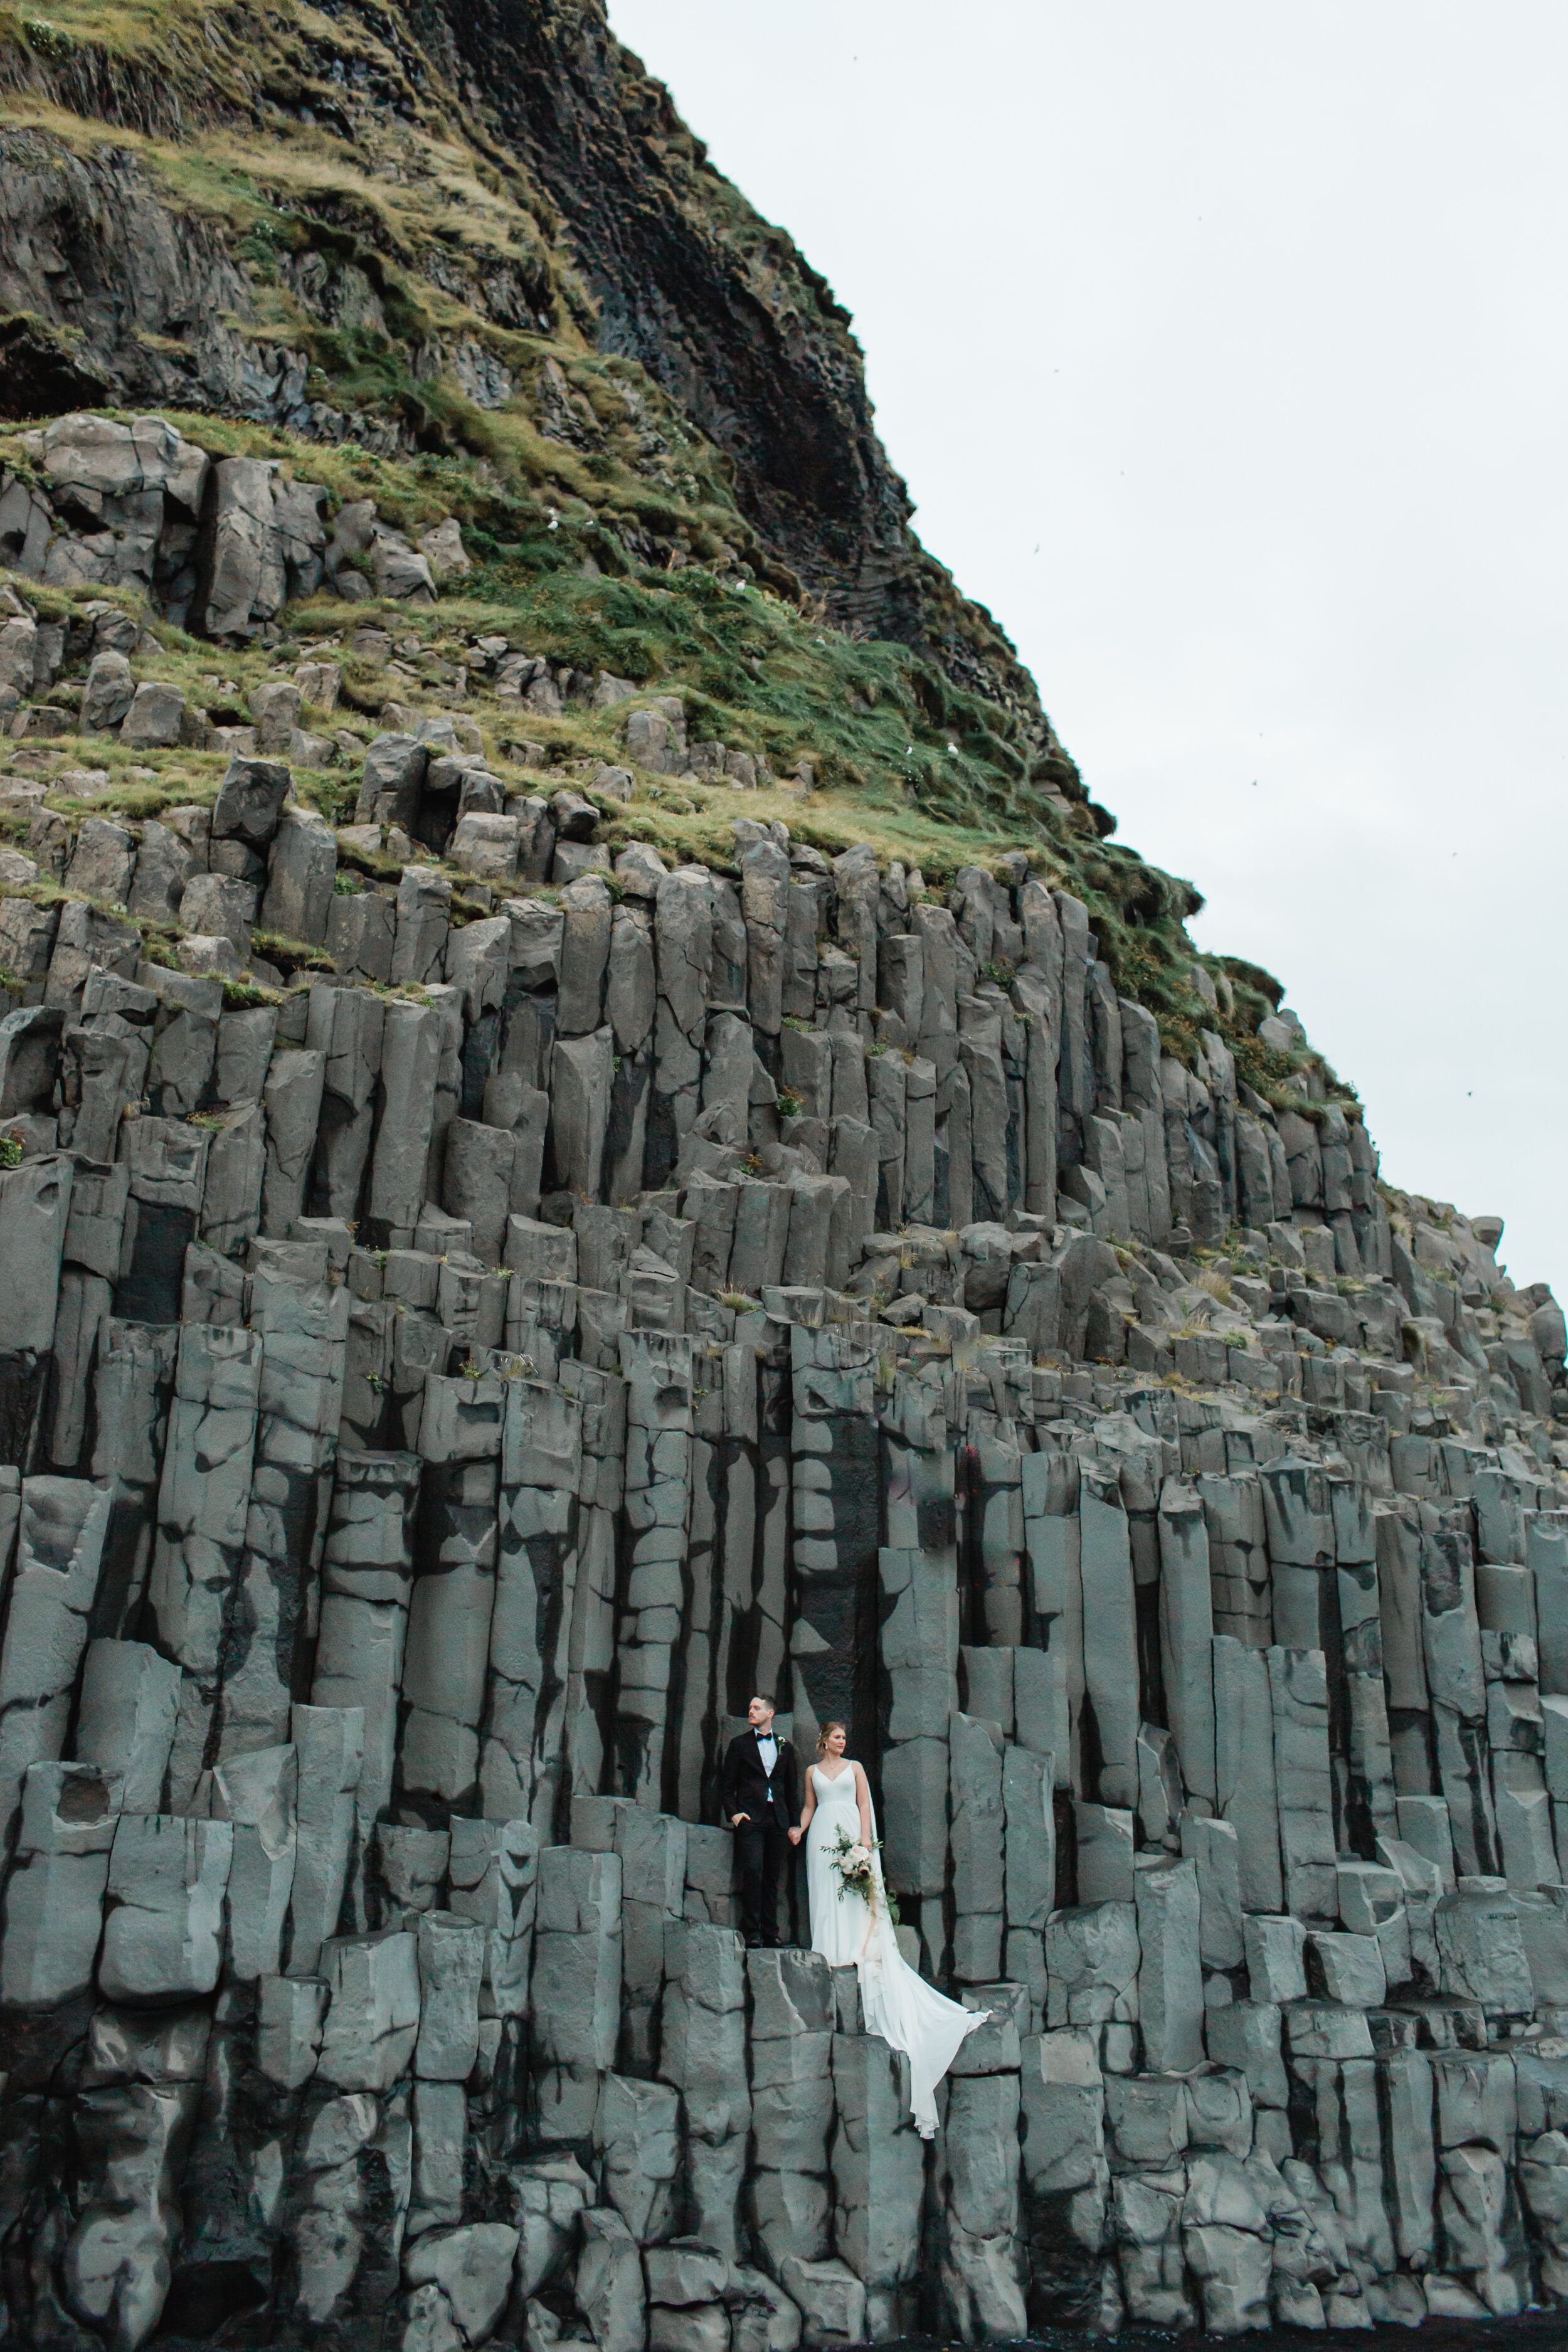 Newlyweds stand on large basalt columns in Iceland near a black sand beach.